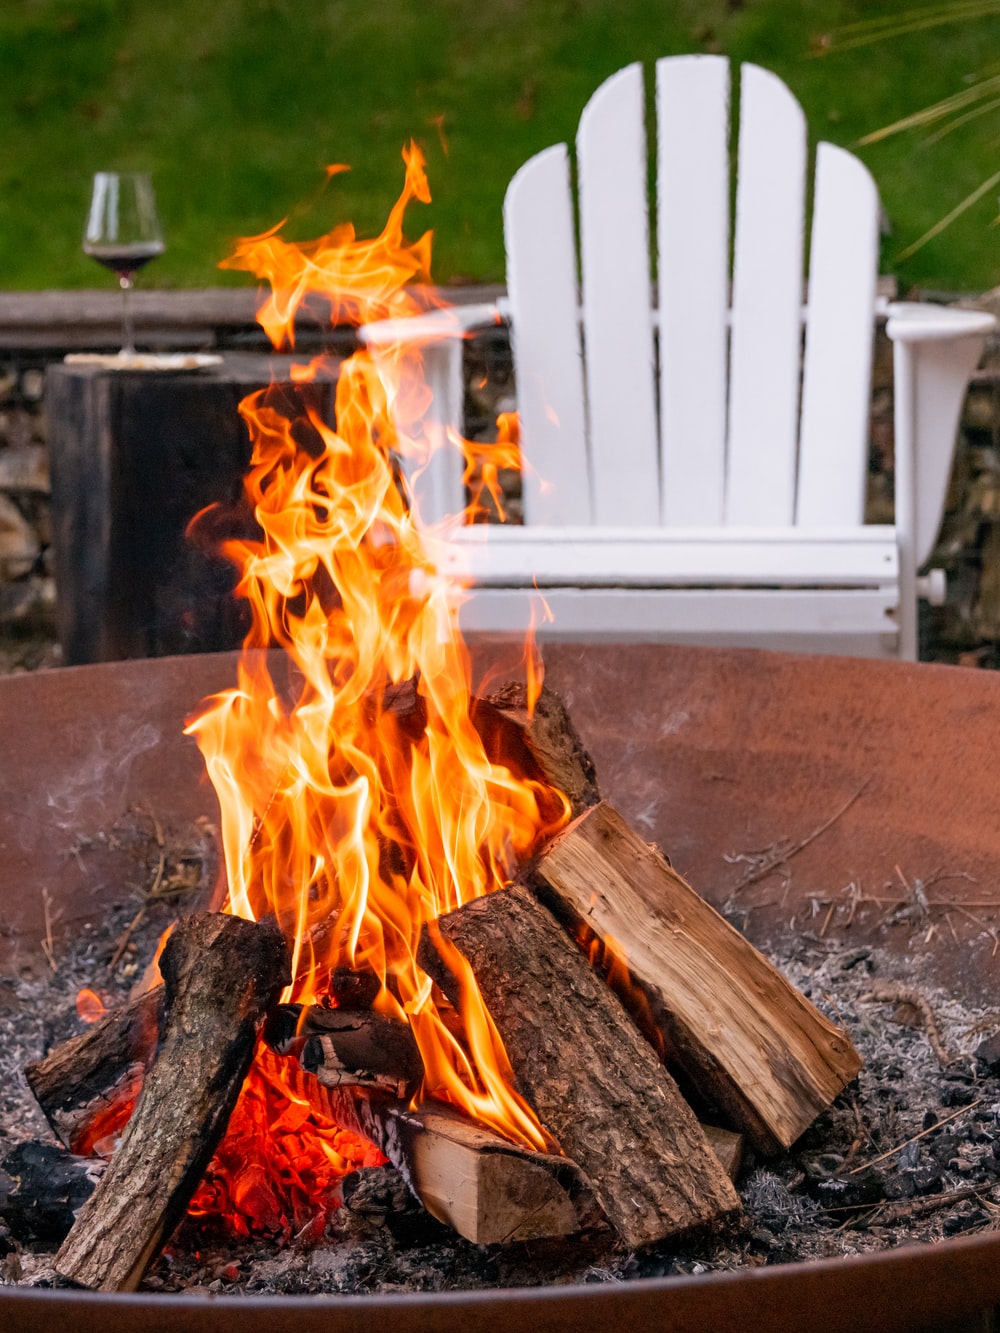 Fire Pit Picture [HQ]. Download Free Image